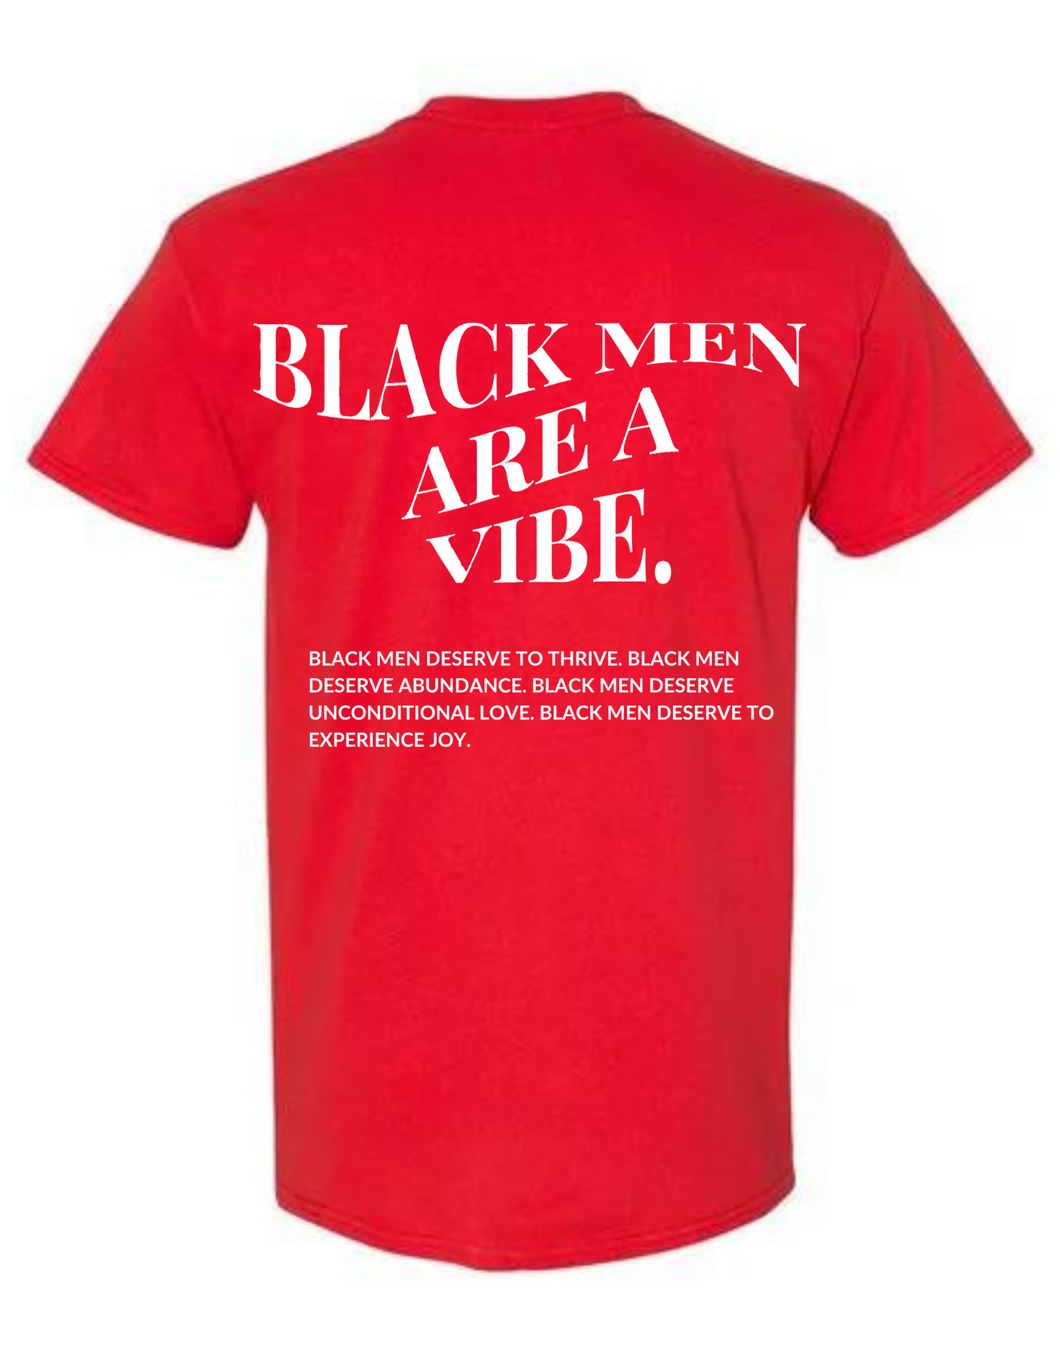 BLACK MEN ARE A VIBE TEE - RED